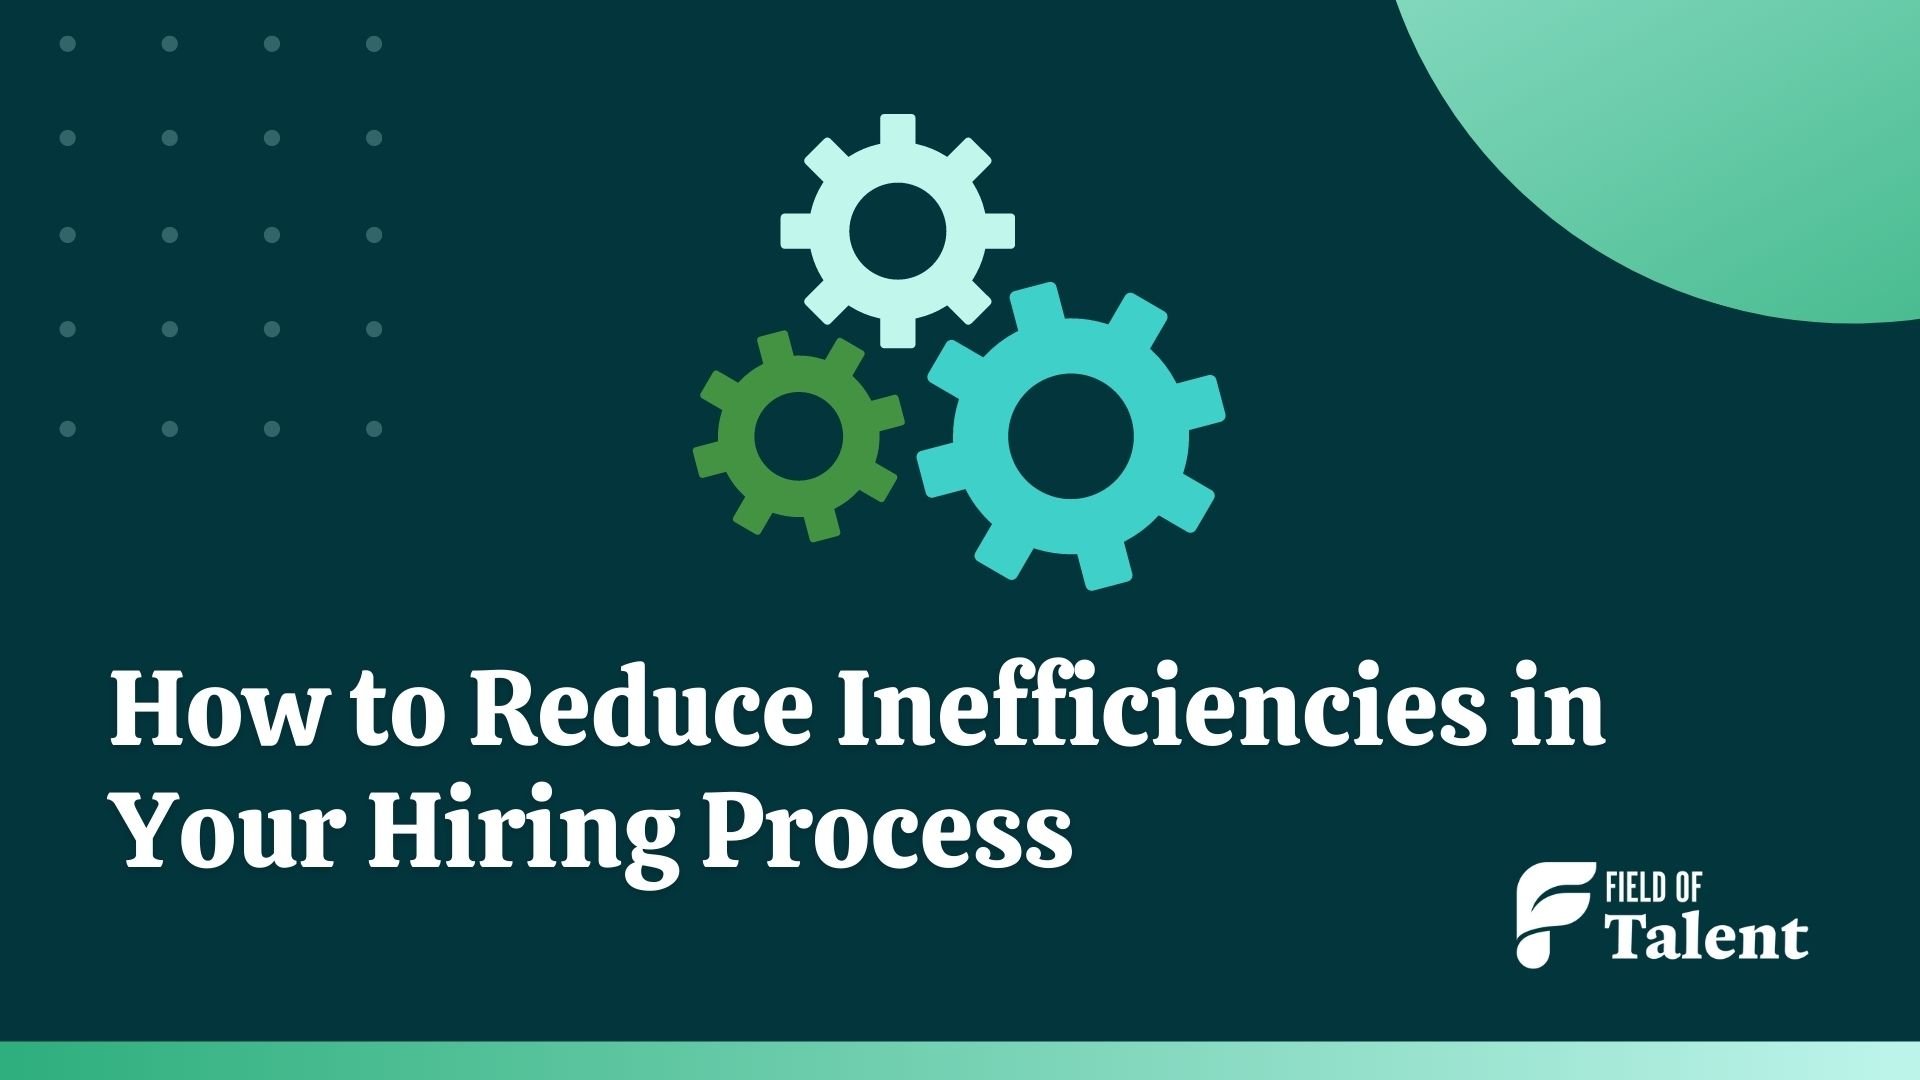 How to reduce inefficiencies in your hiring process